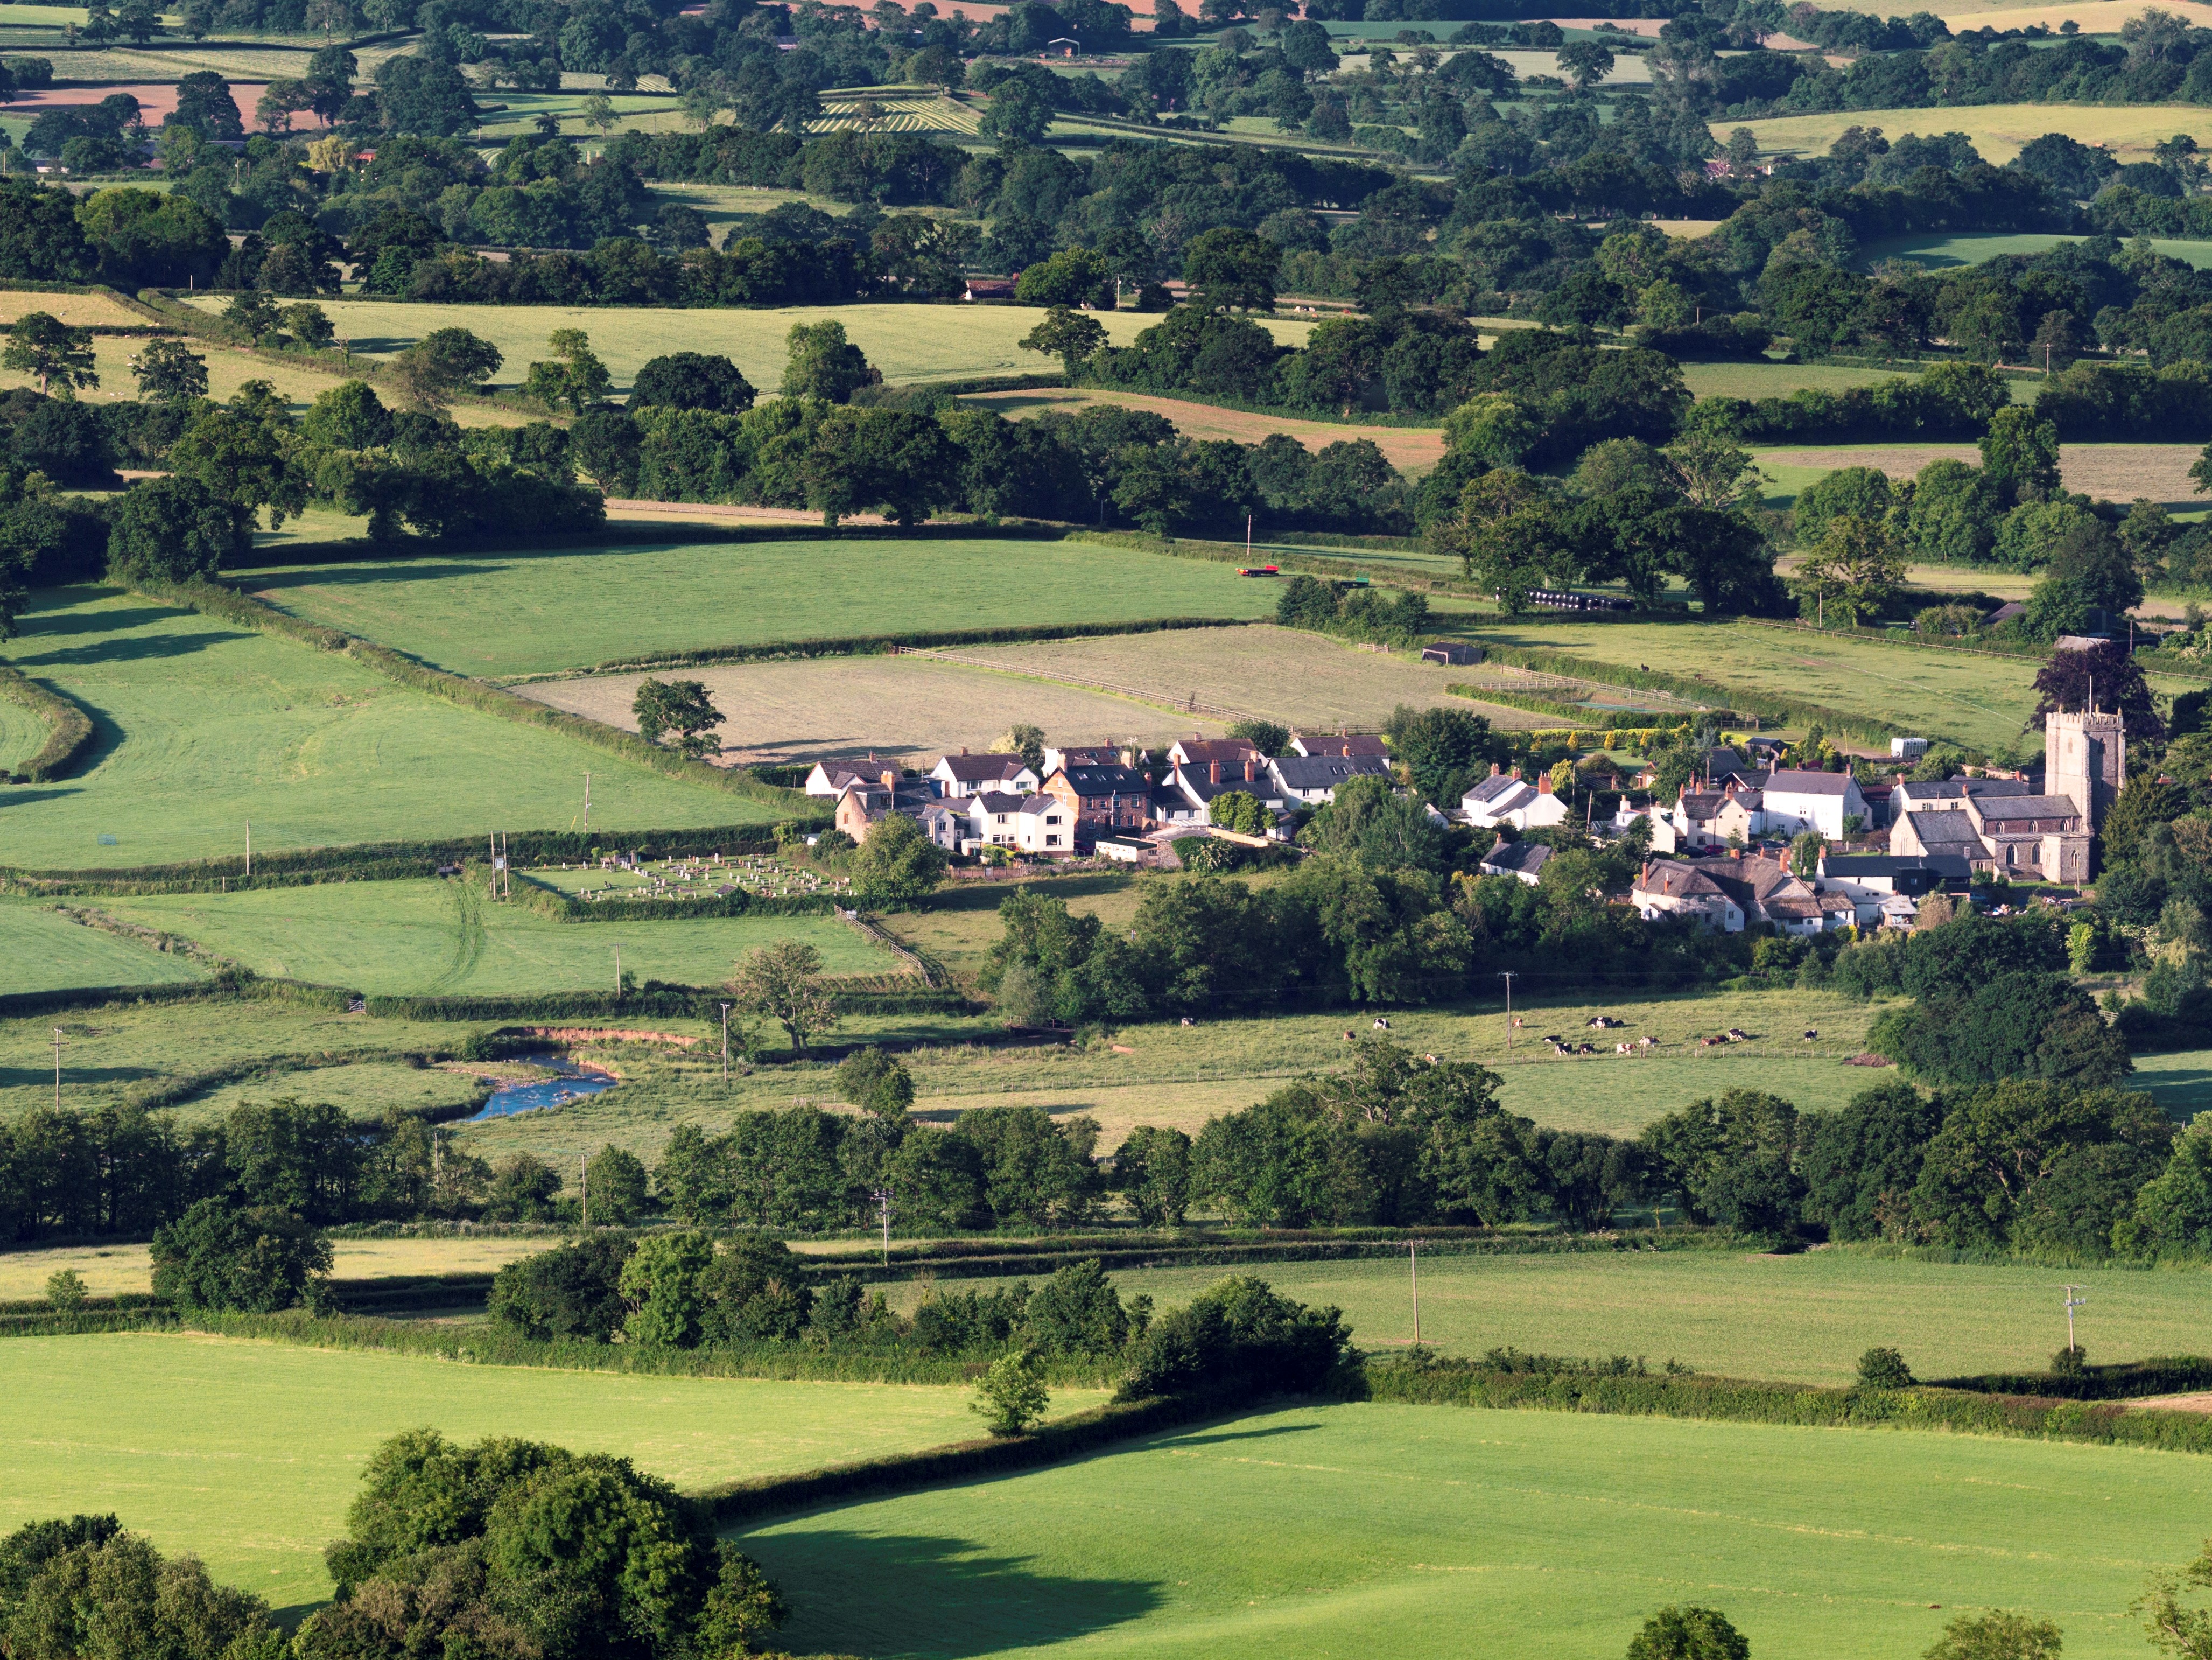 A village set amongst a patchwork of fields and high hedgerows